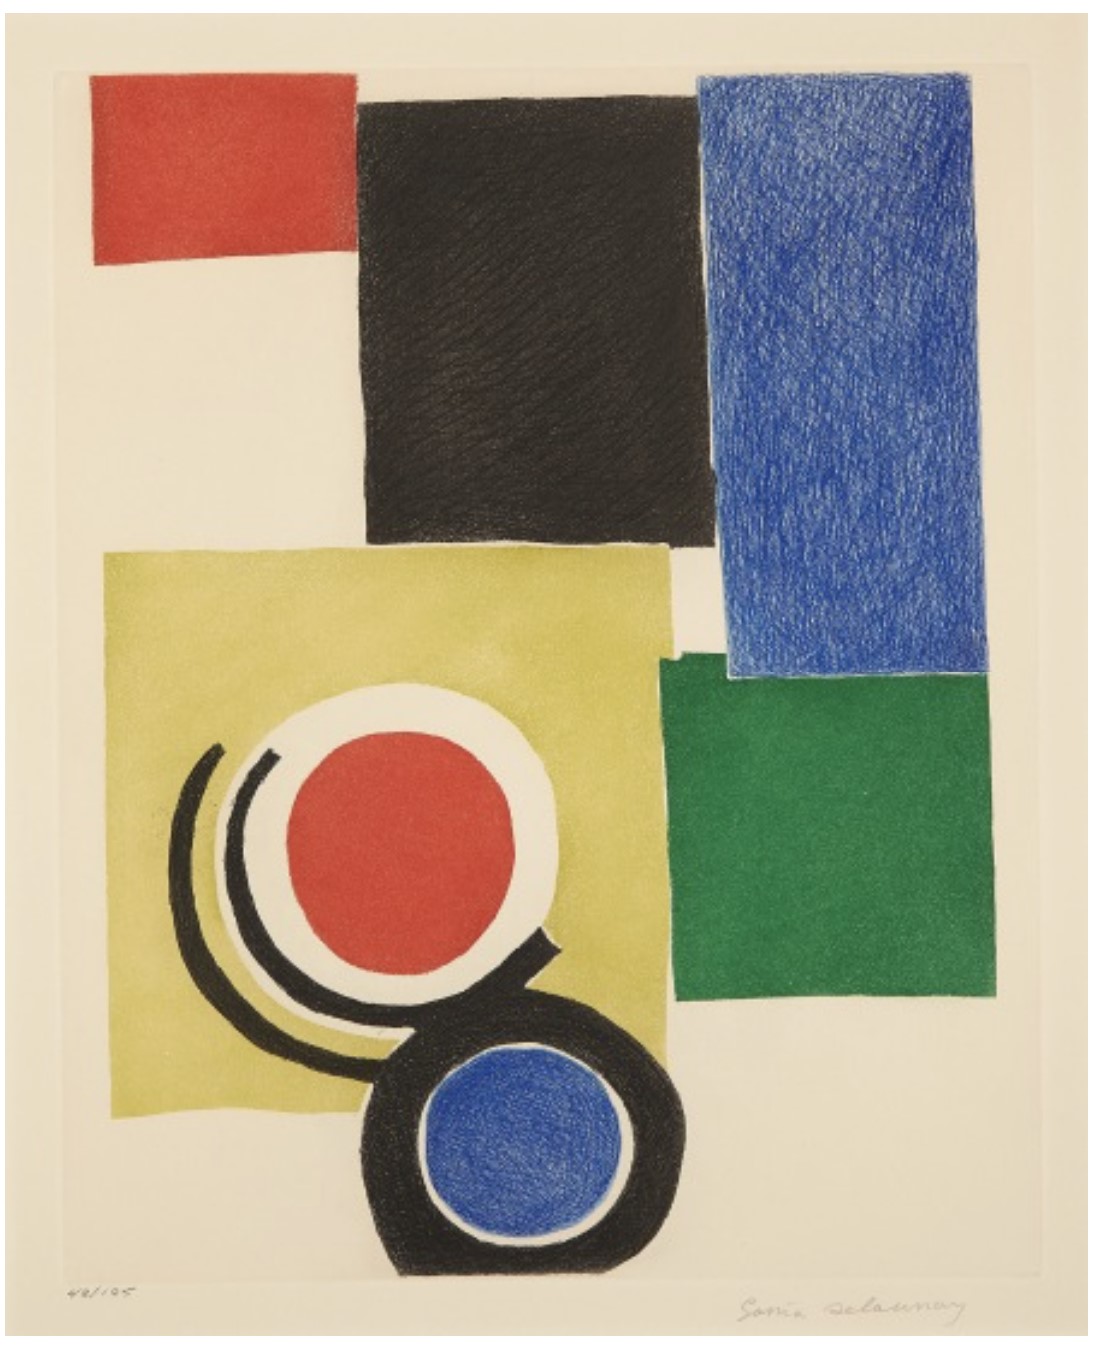 Untitled (Composition with Rectangles, Circles and Semicircles)